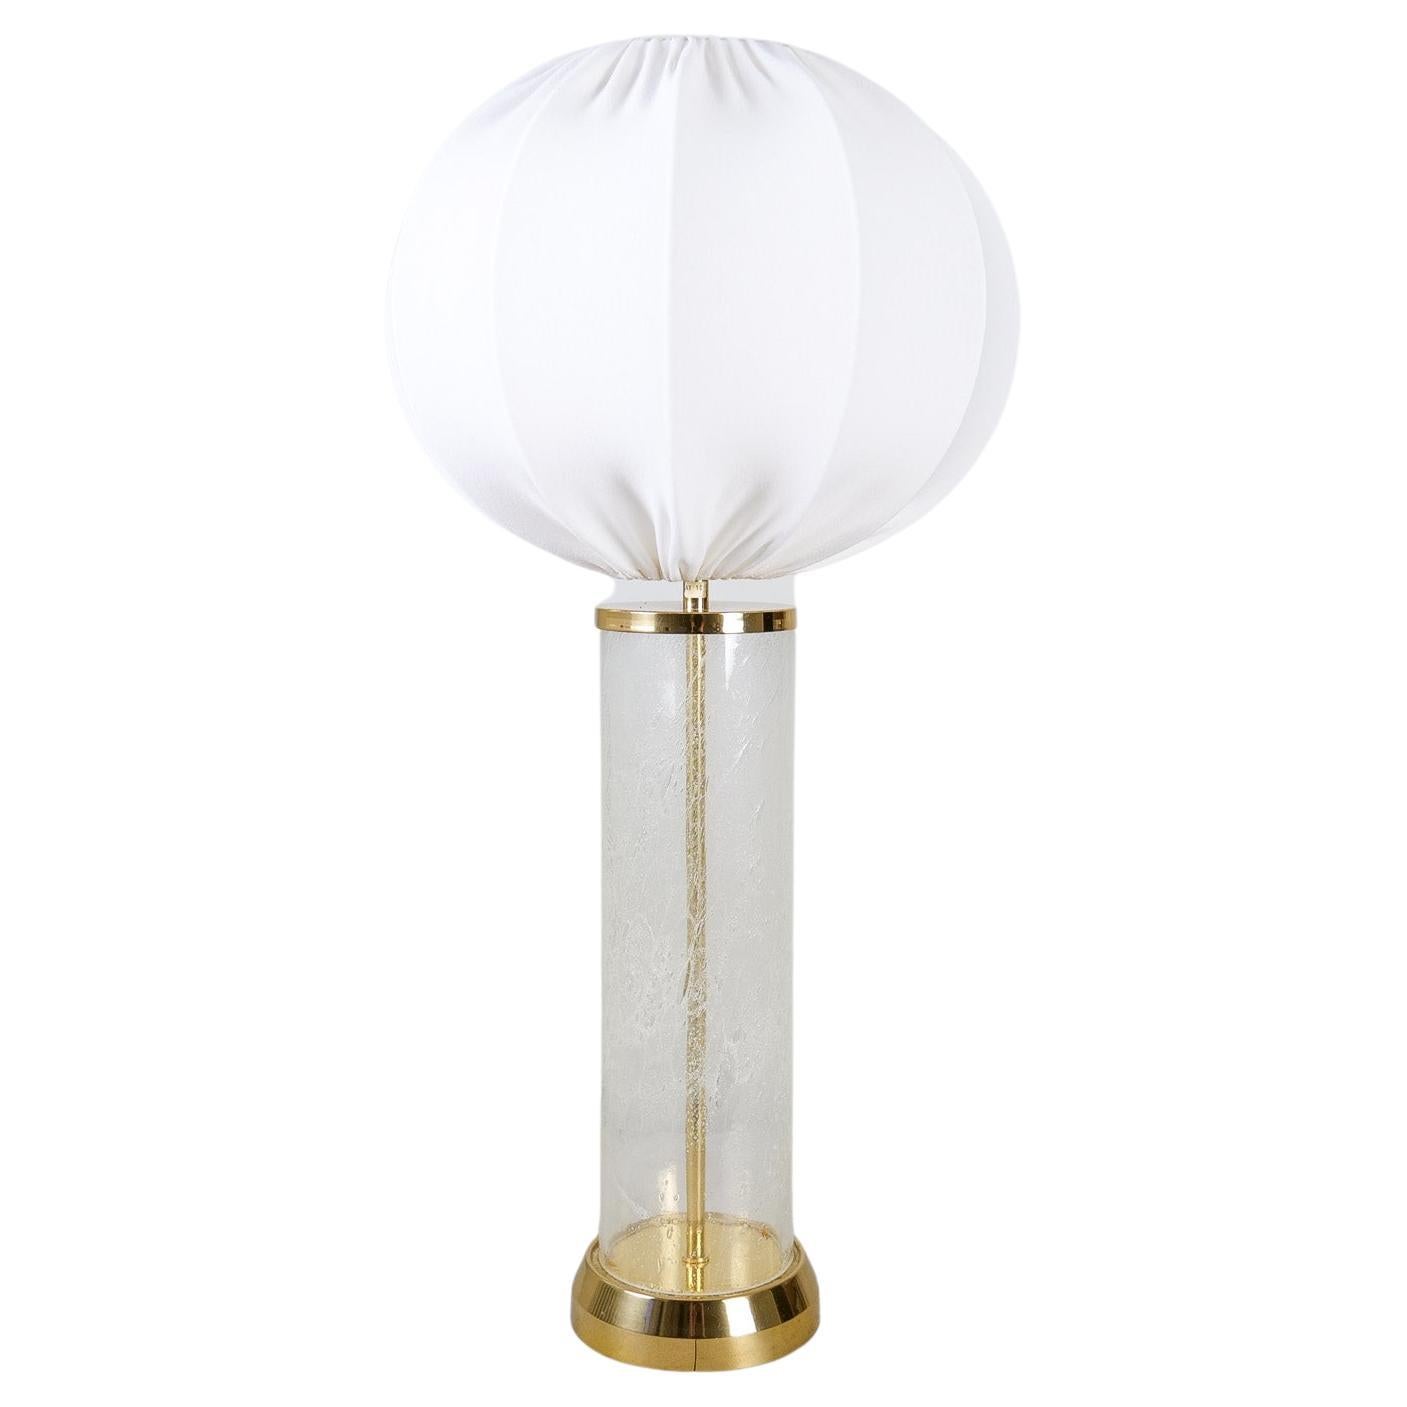 Midcentury Modern Glass and Brass Table Lamp Bergbom B-019 Sweden 1960s For Sale